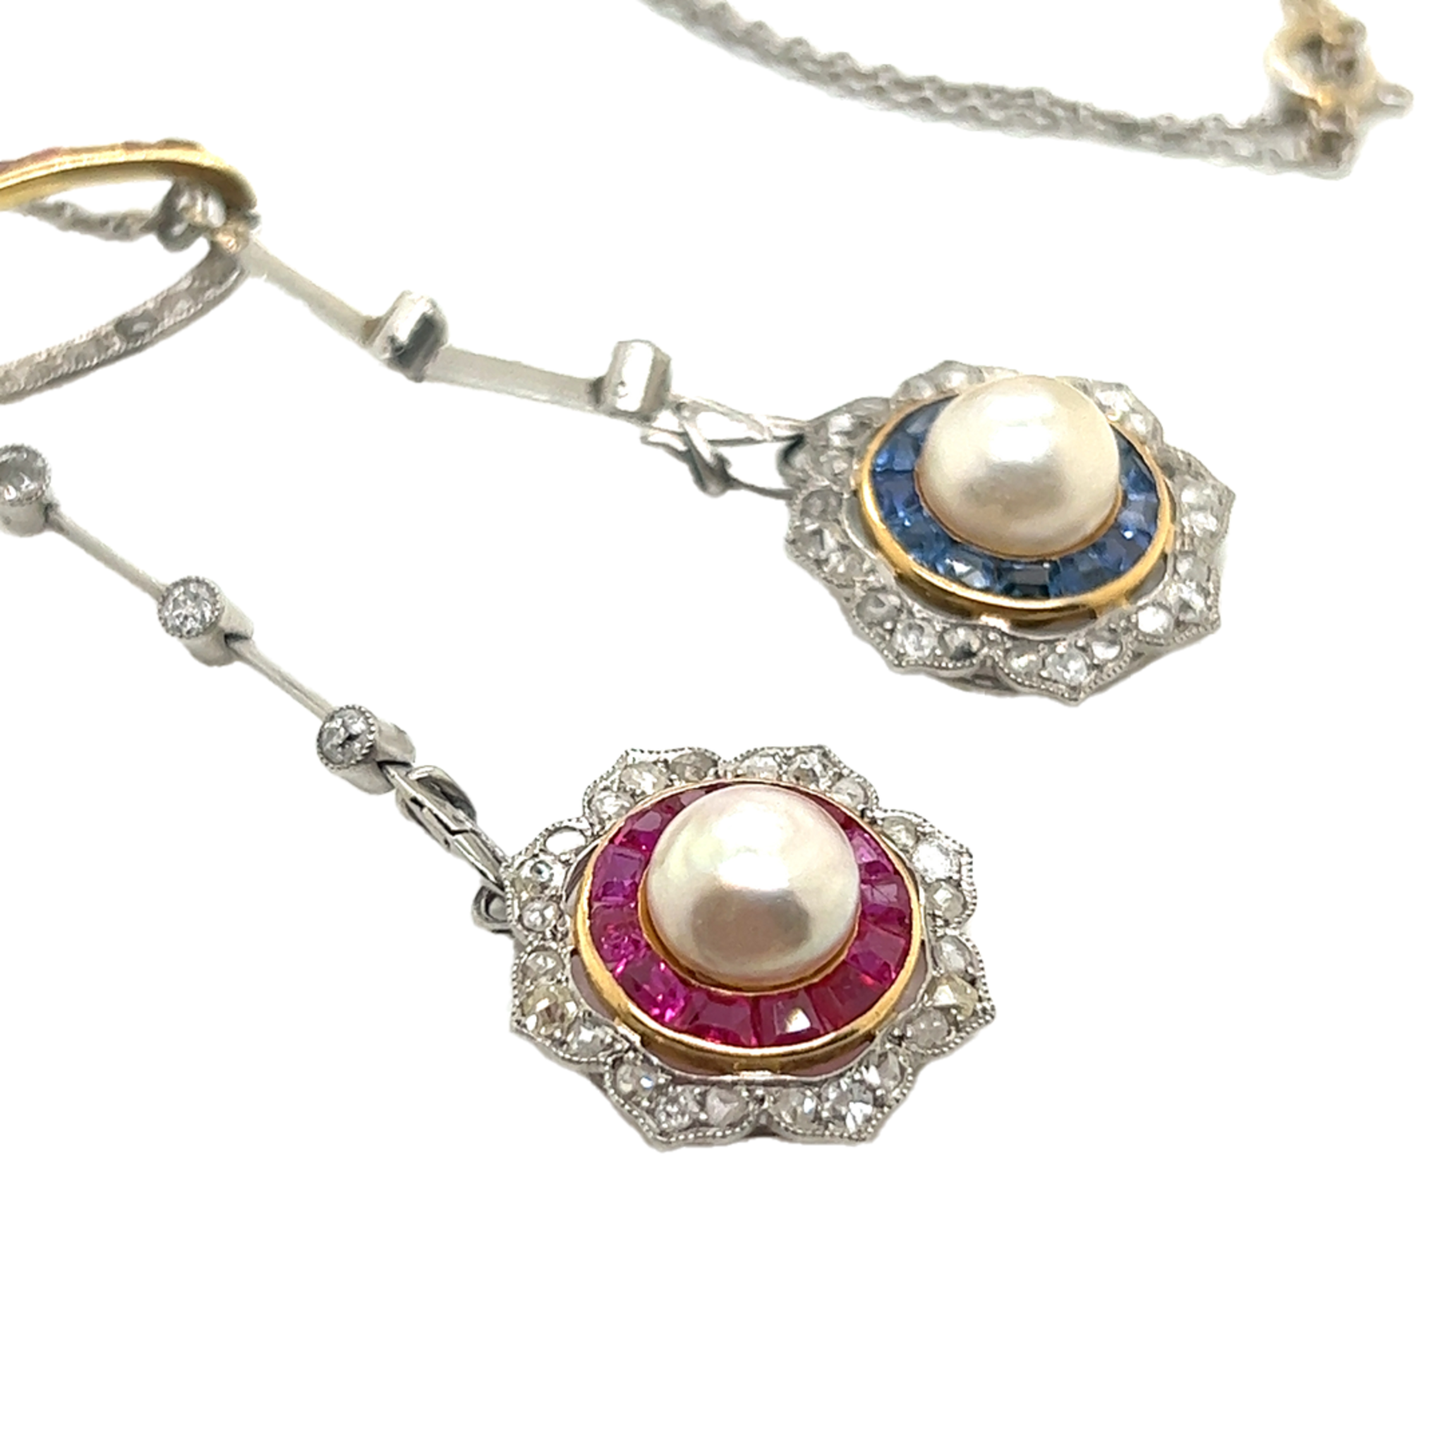 Edwardian Platinum & 18KT Yellow Gold Natural Pearl, Diamond, Ruby & Sapphire Necklace side of pendant